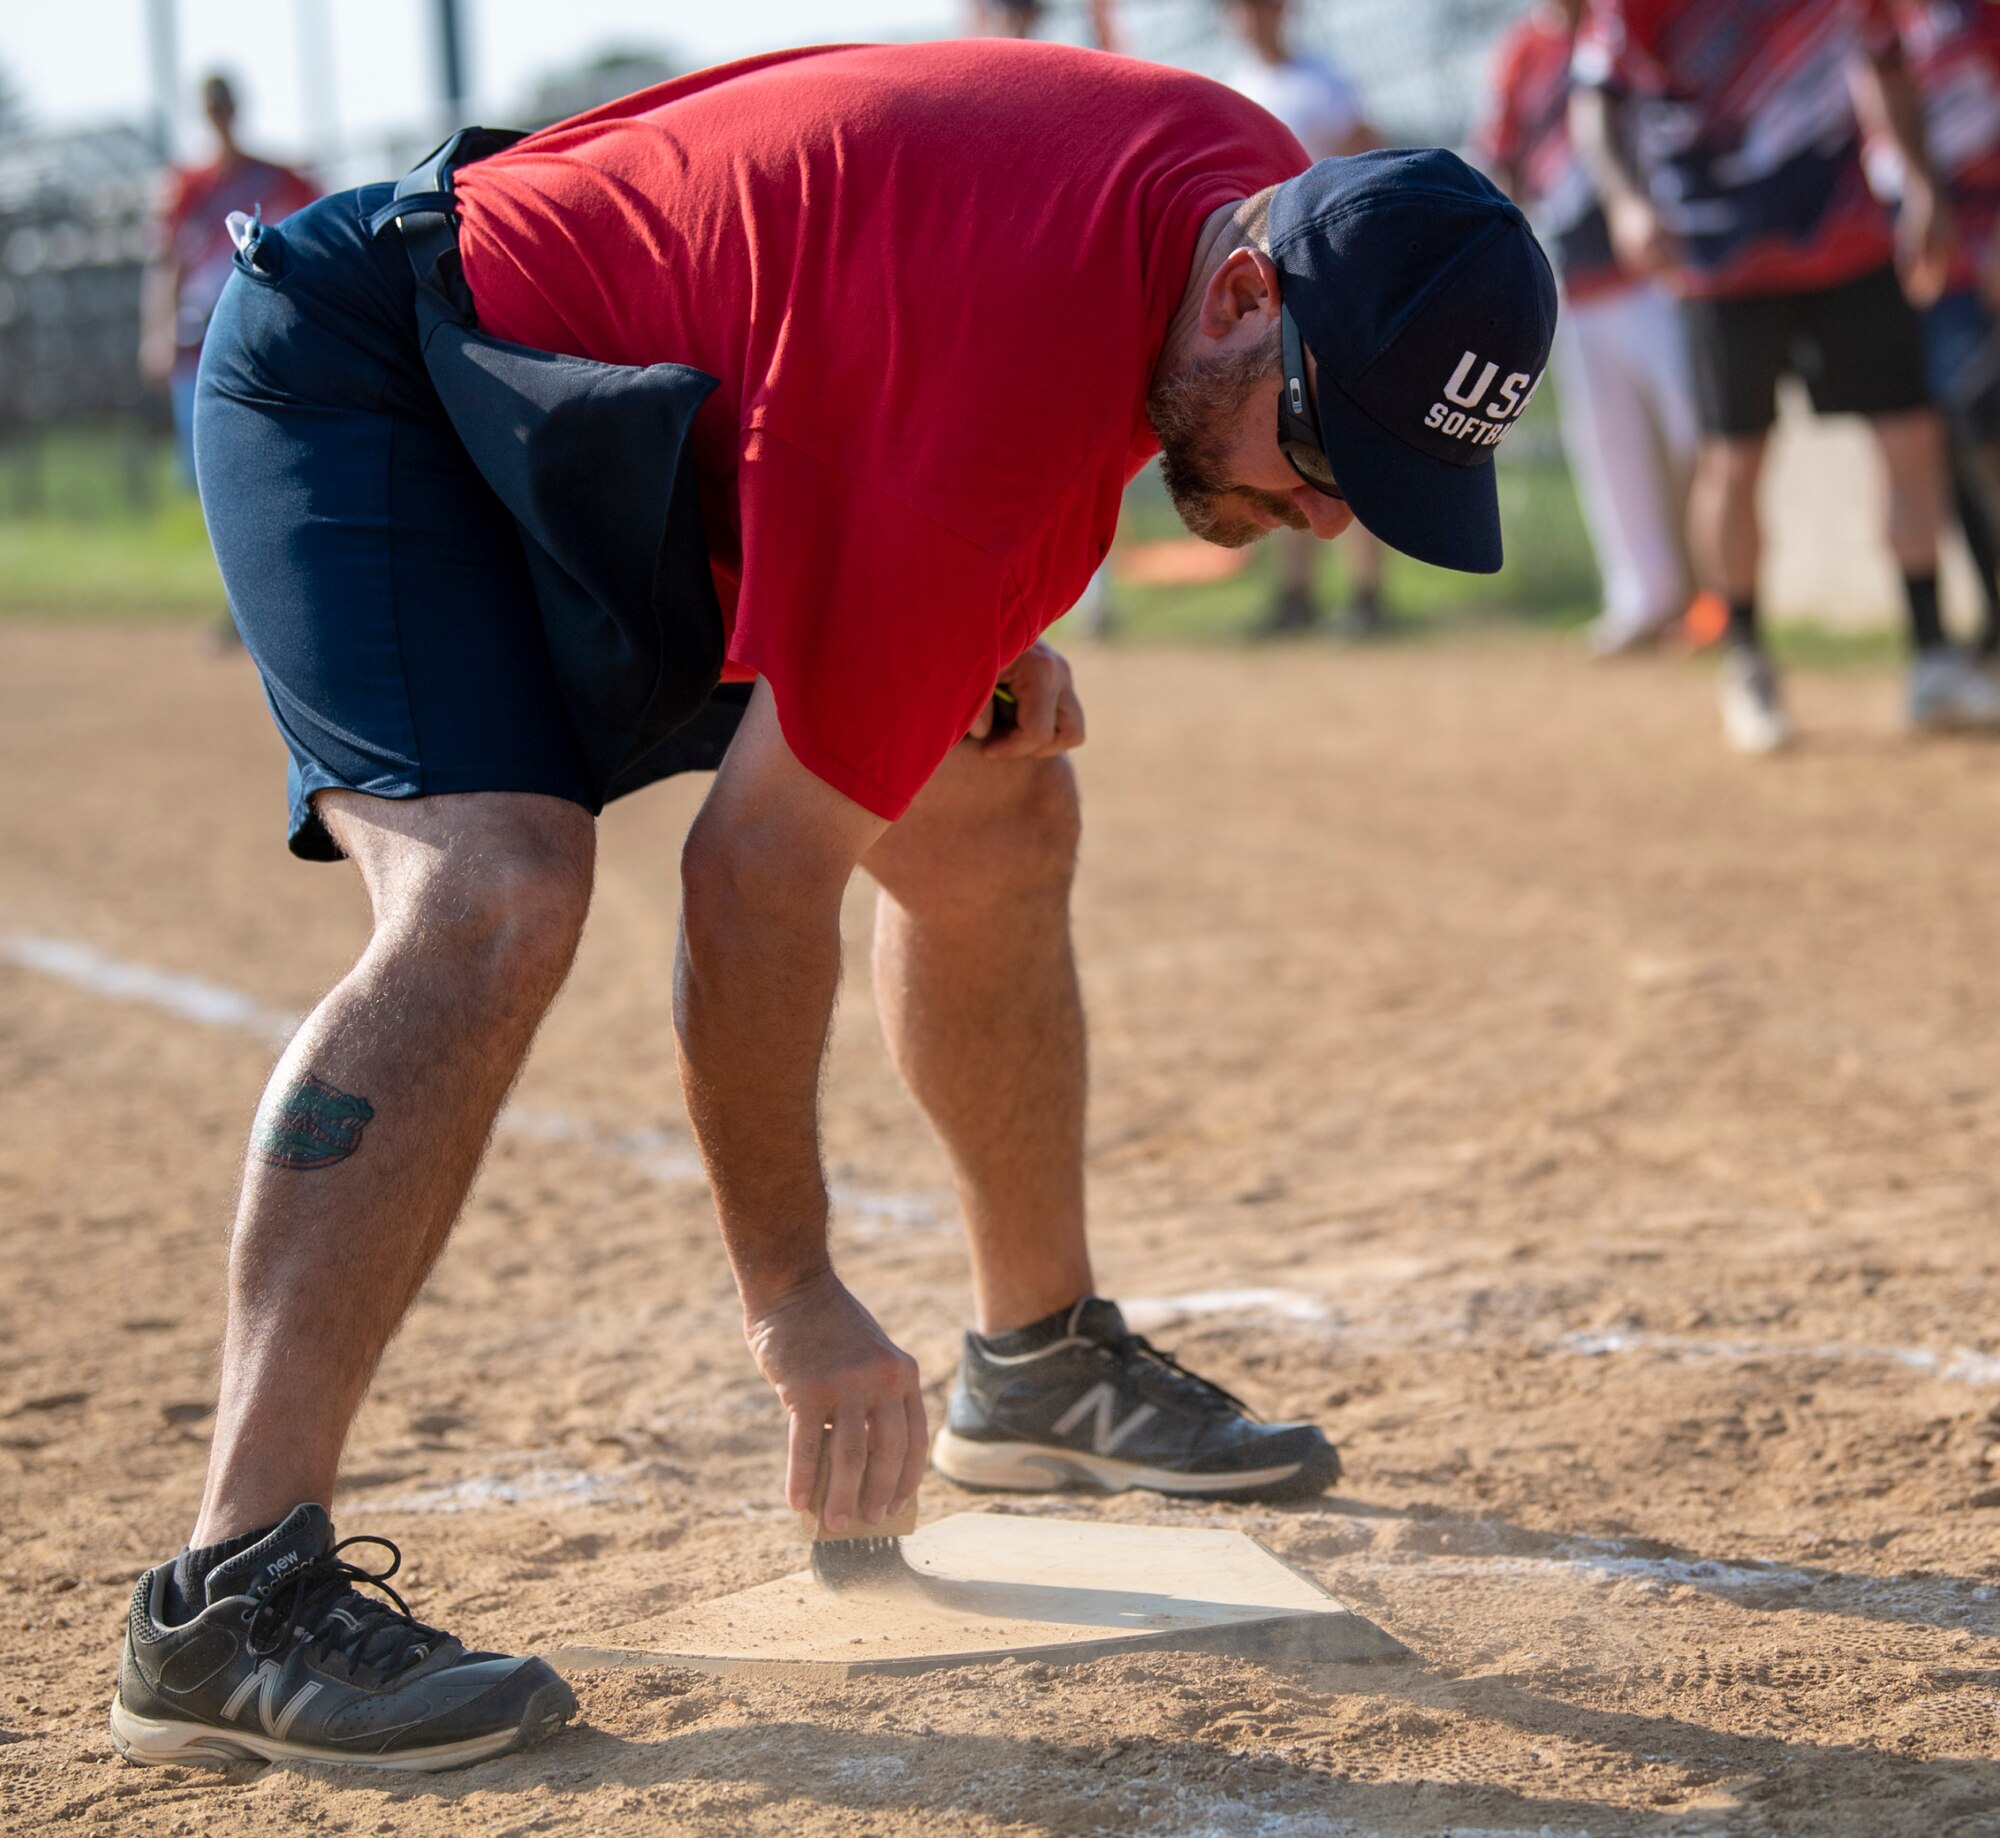 David Patch, volunteer umpire, cleans off home plate during an intramural softball game between the 436th Security Forces Squadron and the 436th Maintenance Squadron Isochronal Maintenance Dock on Dover Air Force Base, Delaware, July 26, 2021. The 436th SFS won the game 13-4. (U.S. Air Force photo by Tech. Sgt. Nicole Leidholm)